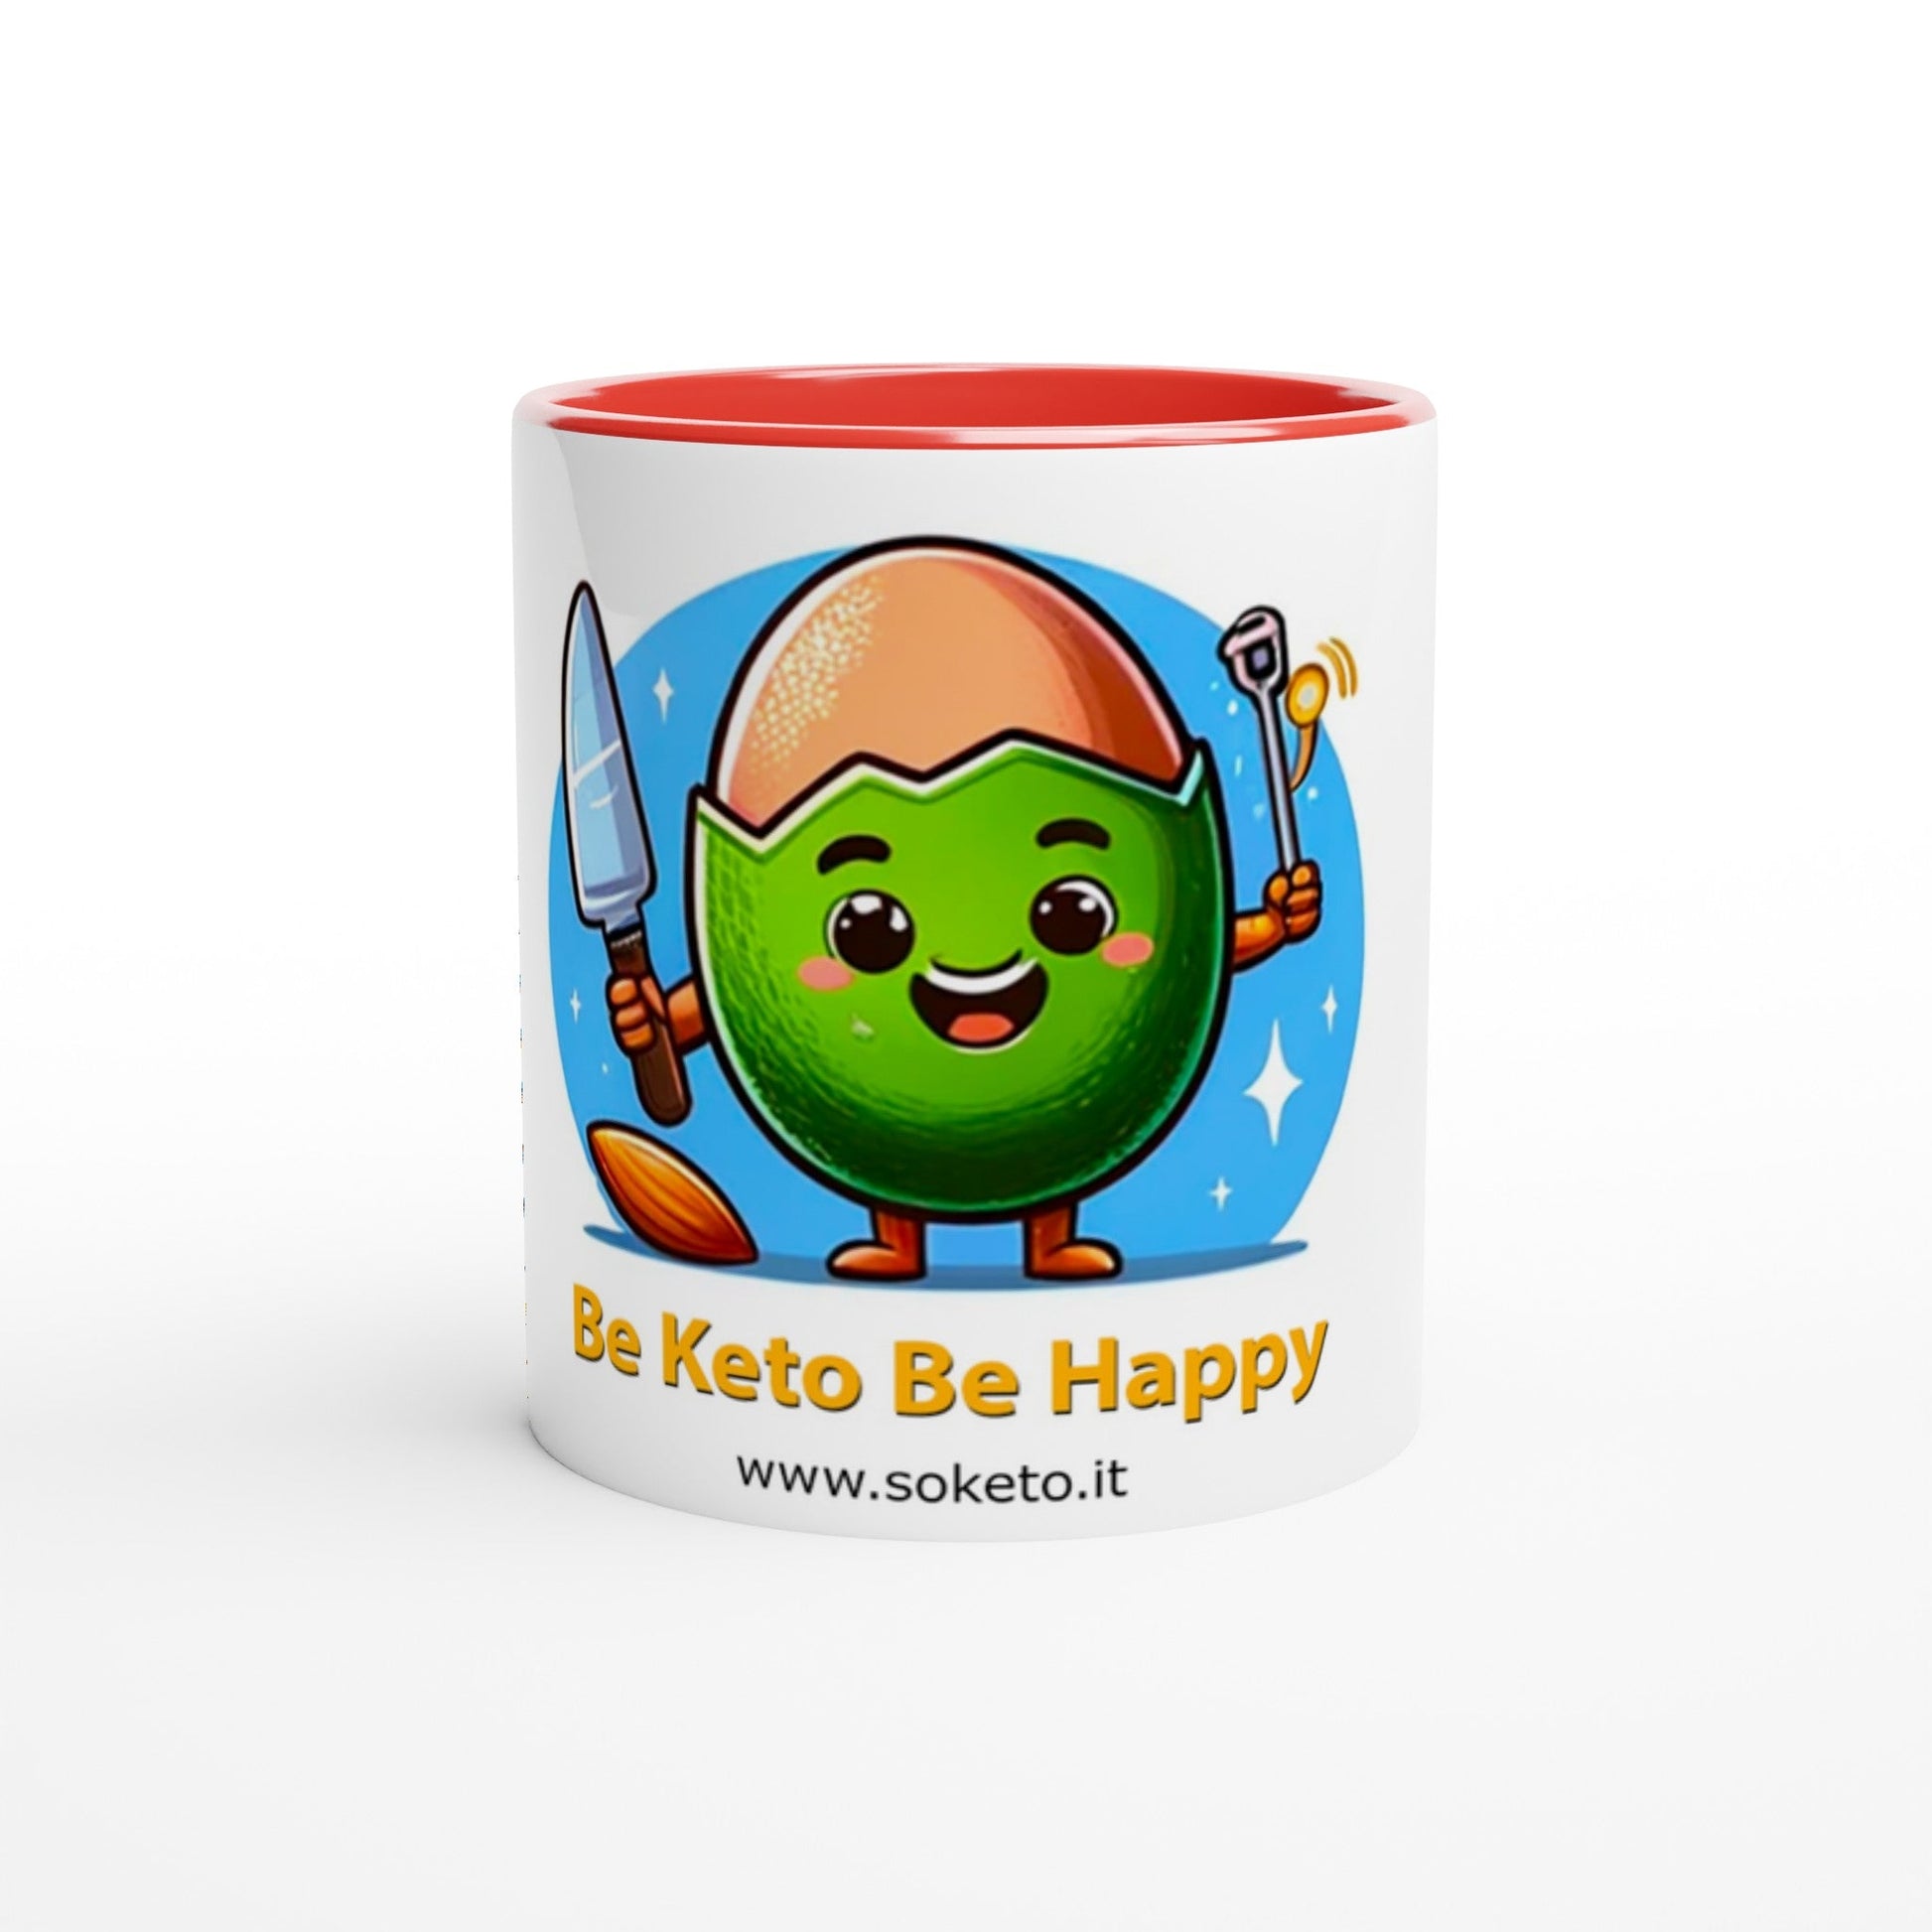 350ml "Be Keto Be Happy" Mug with Colored Interior - Start the Day with Style and Health-2